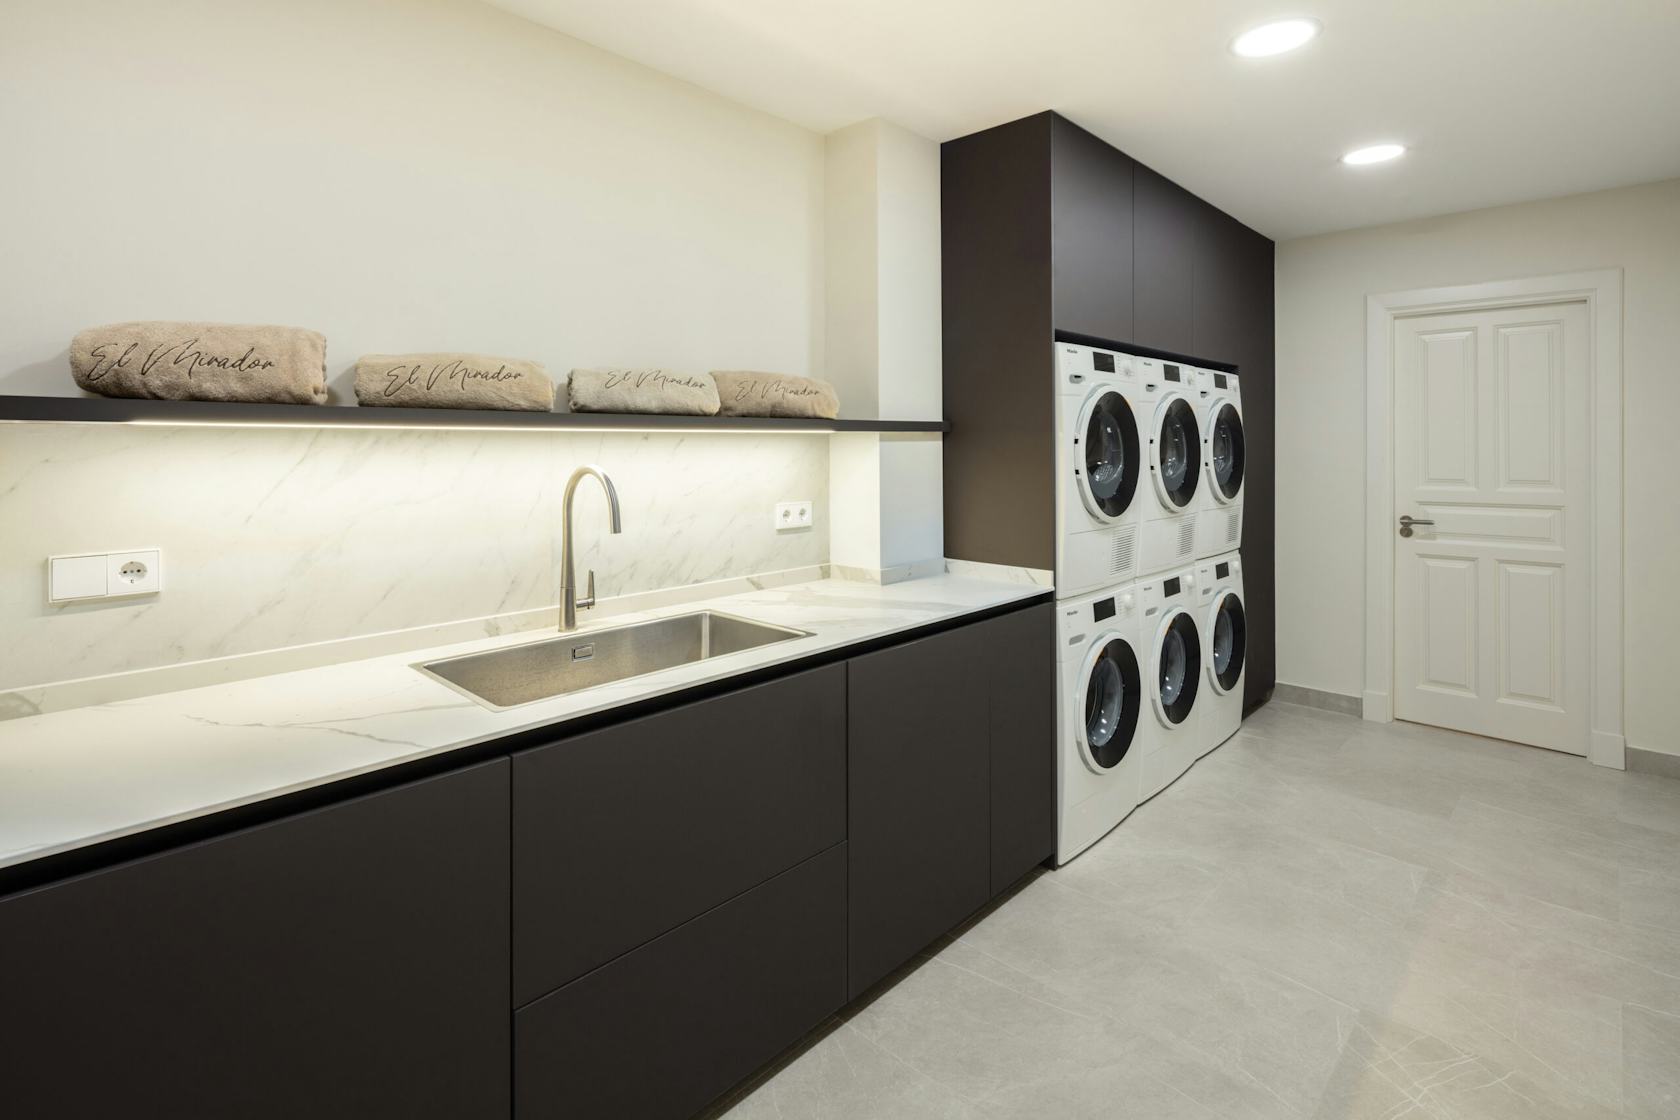 sink laundry interior design indoors washer electrical device device appliance sink faucet